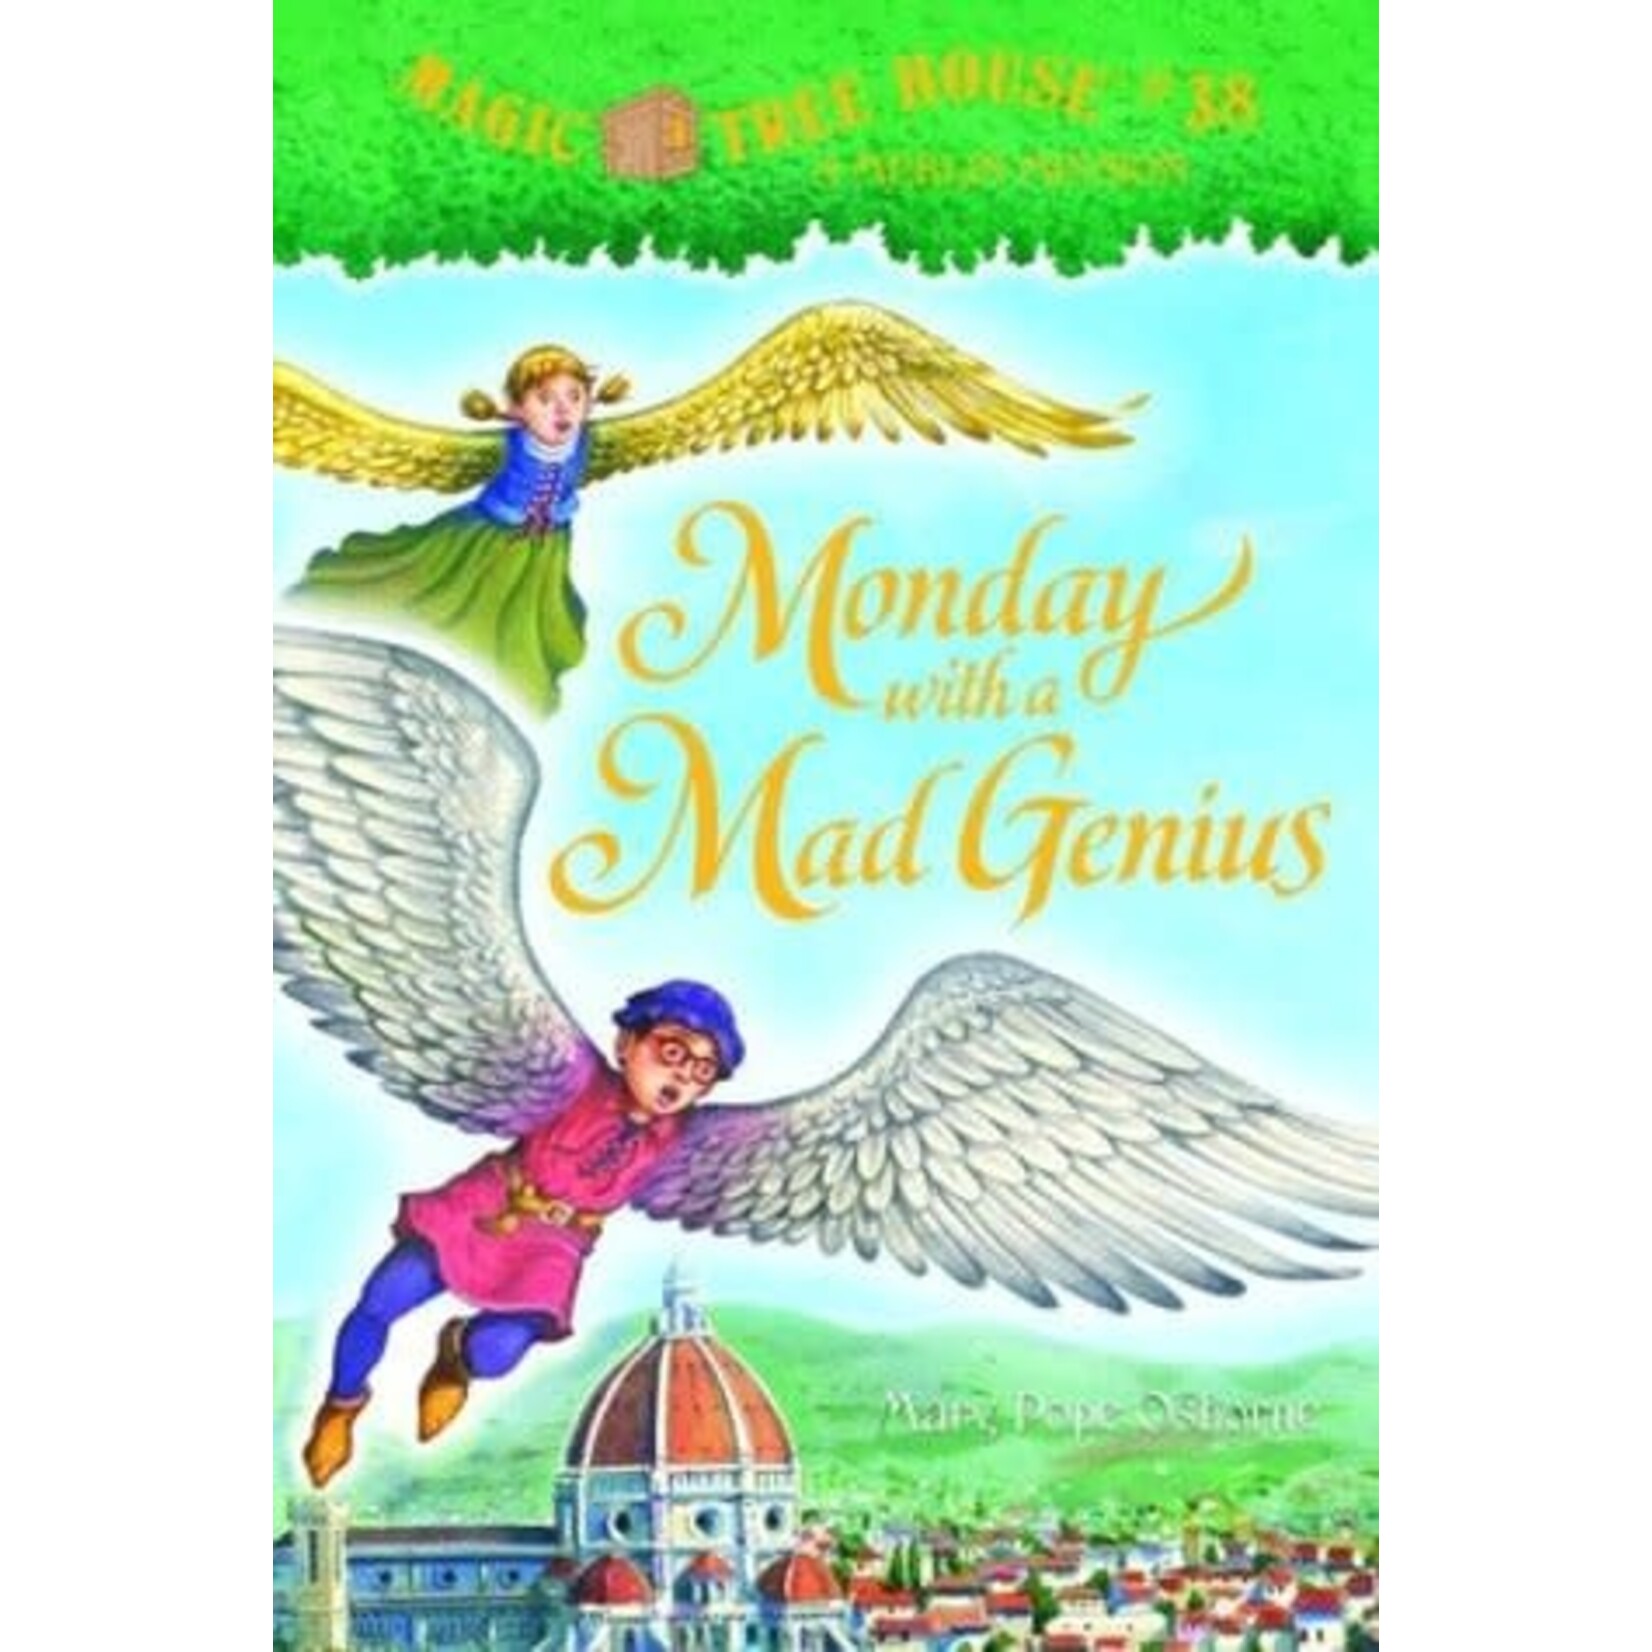 Mary Pope Osborne Magic Tree House - Monday with a Mad Genius (Book #38)